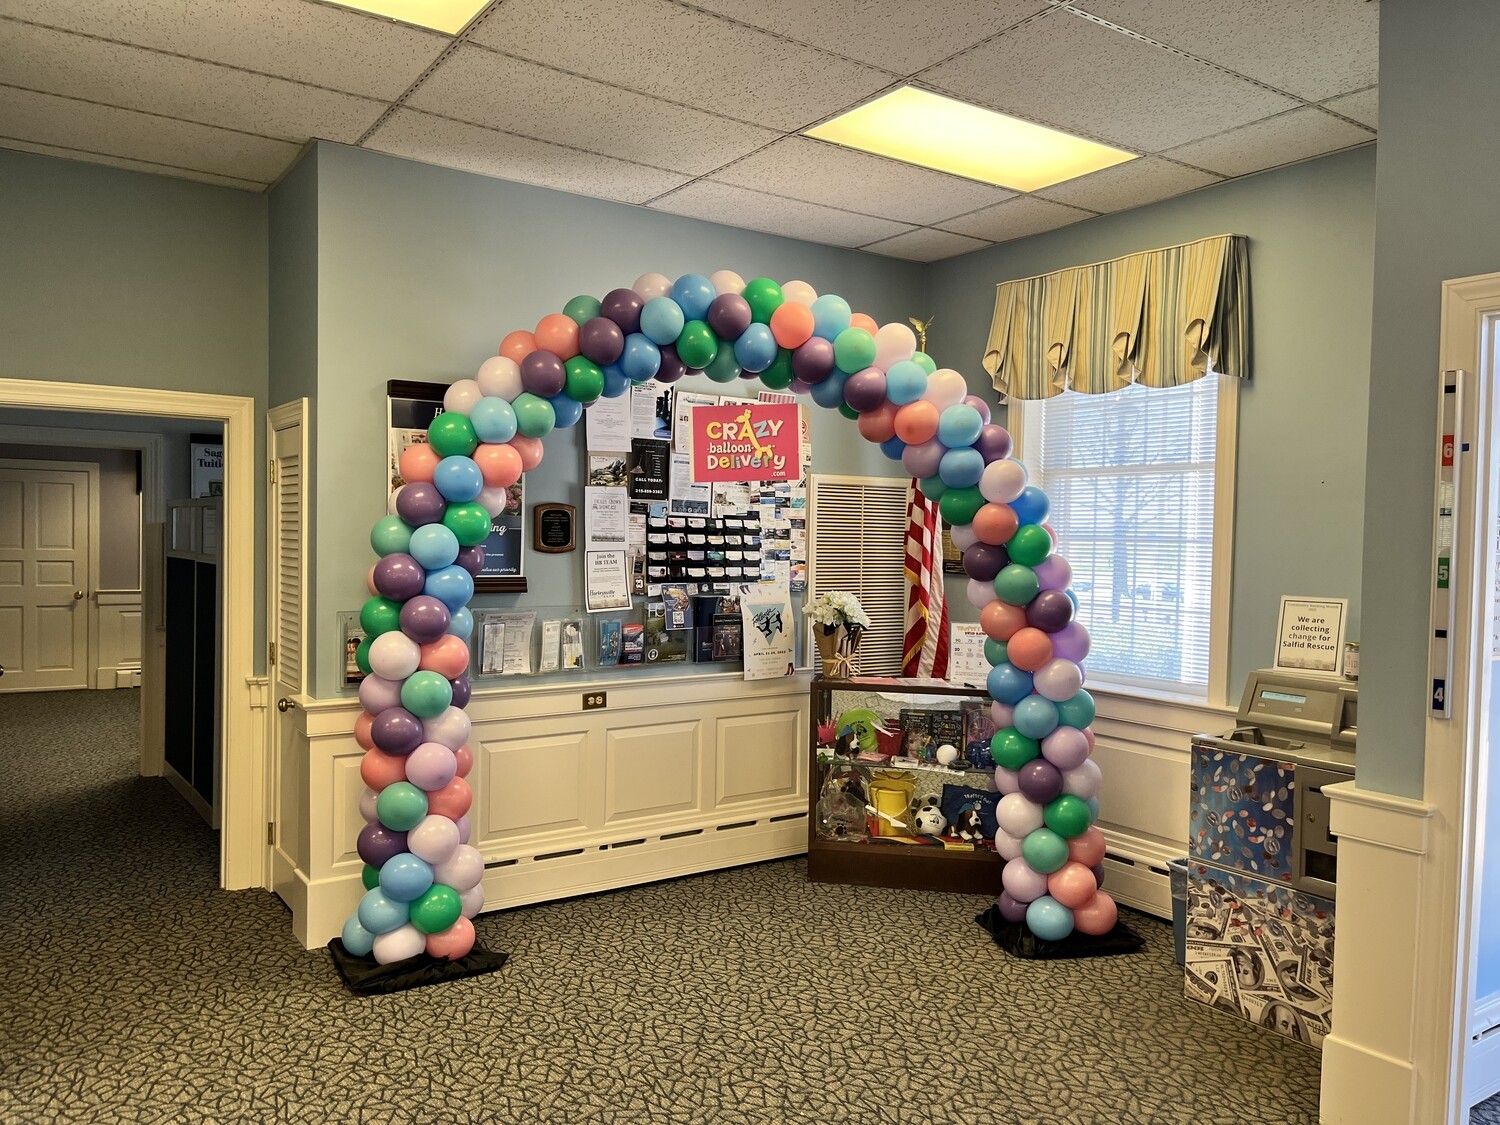 Traditional (even bubble) arch, confetti pattern artist choice of colors